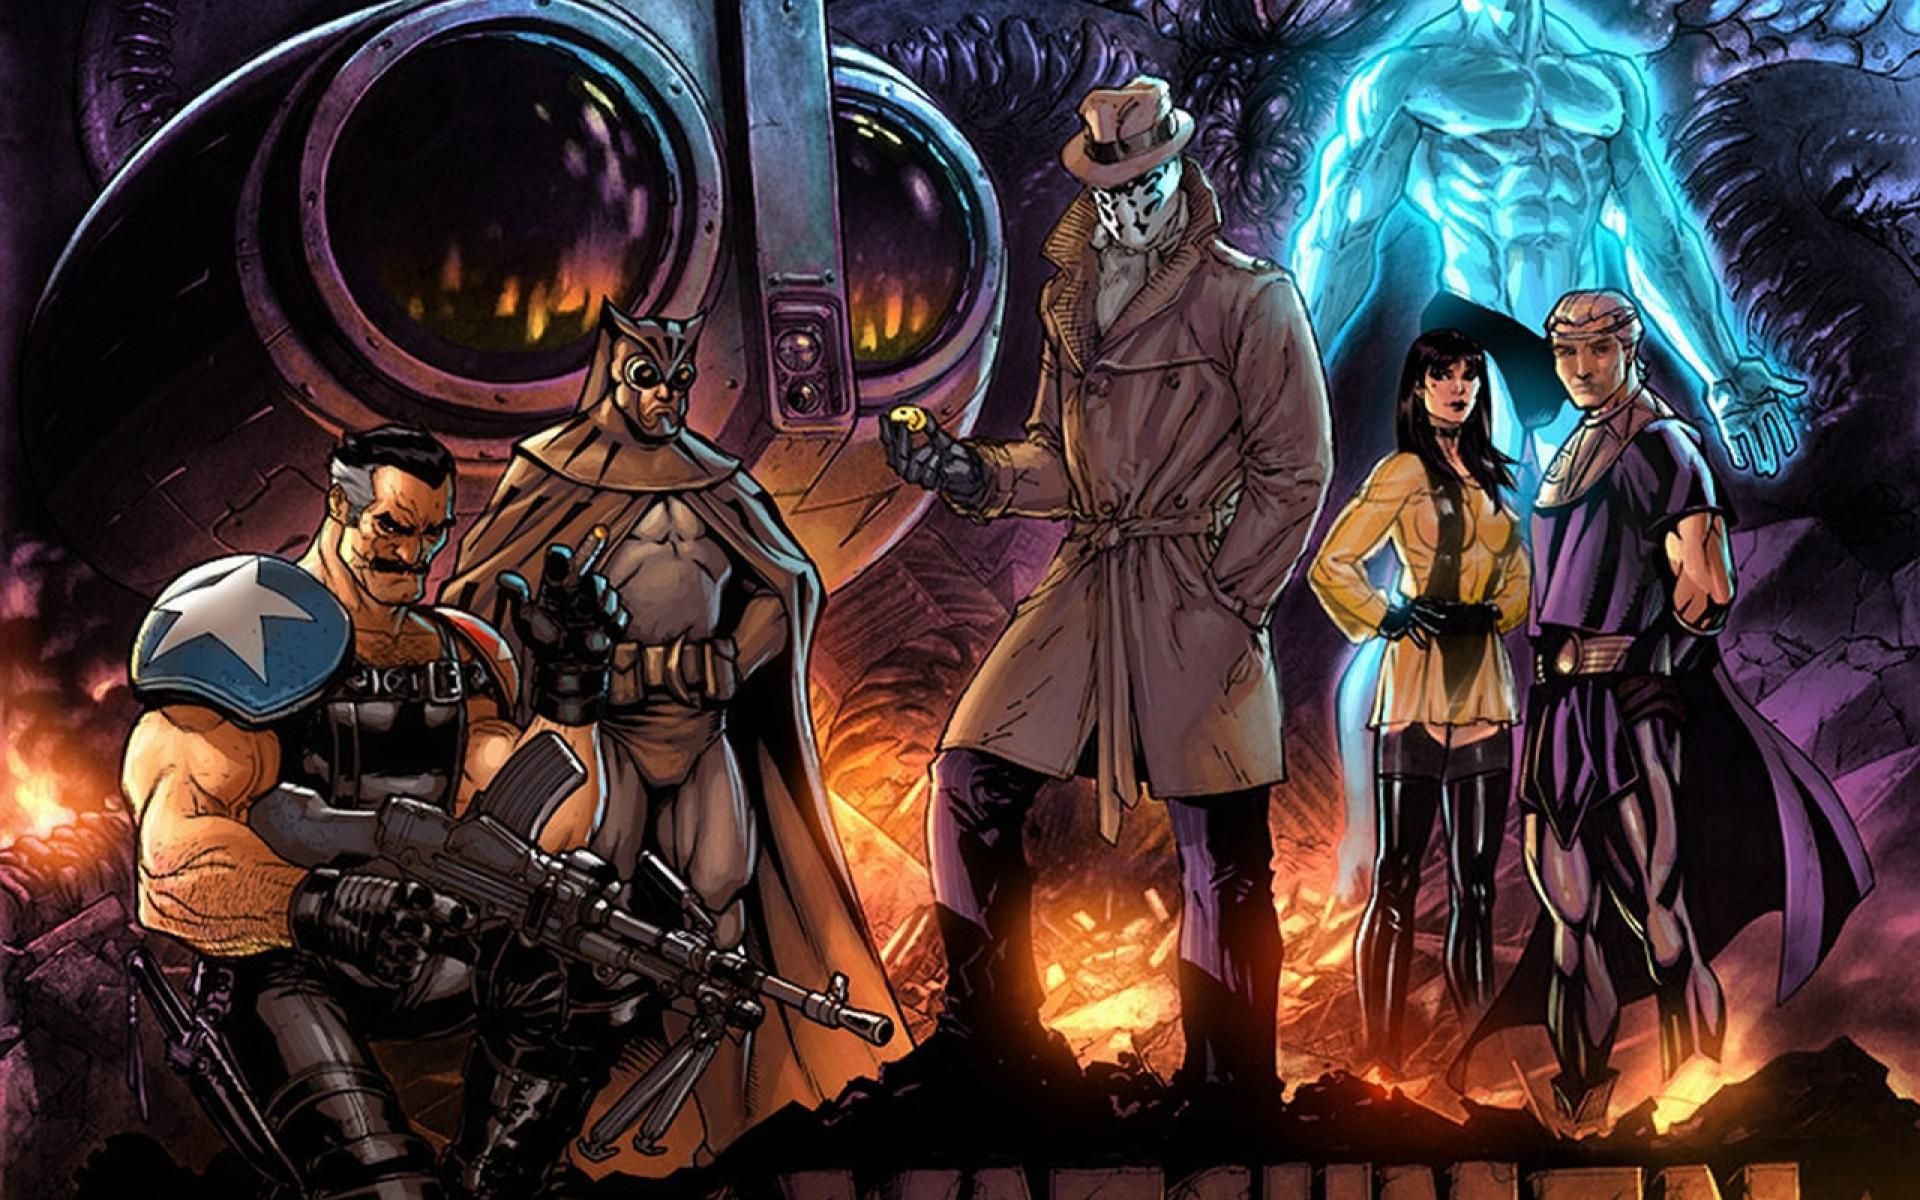 watchmen wallpaper hd,action adventure game,pc game,strategy video game,cg artwork,games